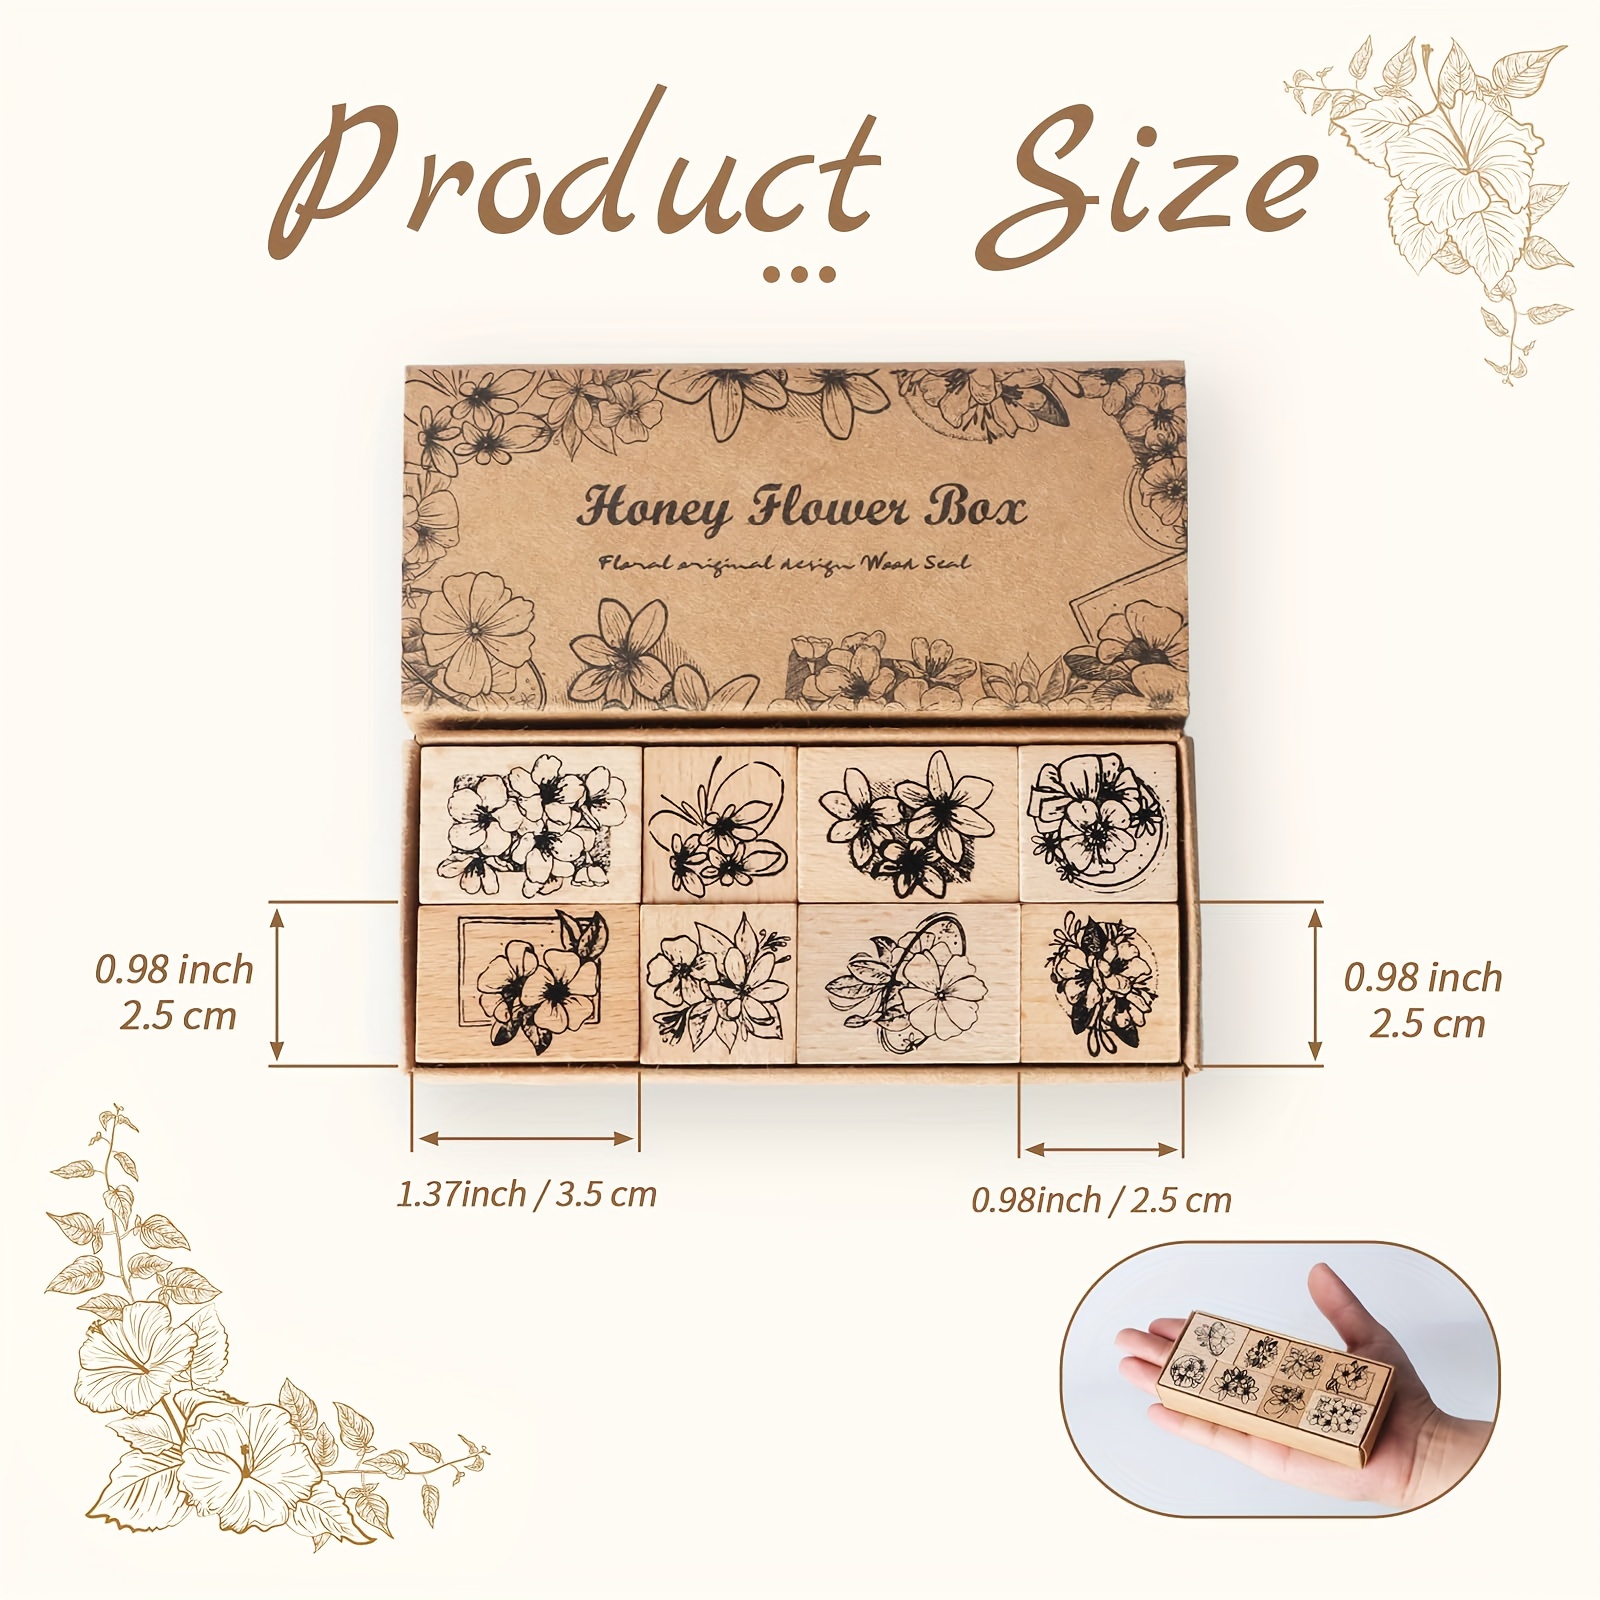 RISYPISY Wood Rubber Stamp Set, 10pcs Decorative Mounted Rubber Stamps with Plant Flower Printed & 12 Sheets Border Style Card for Card Making, DIY